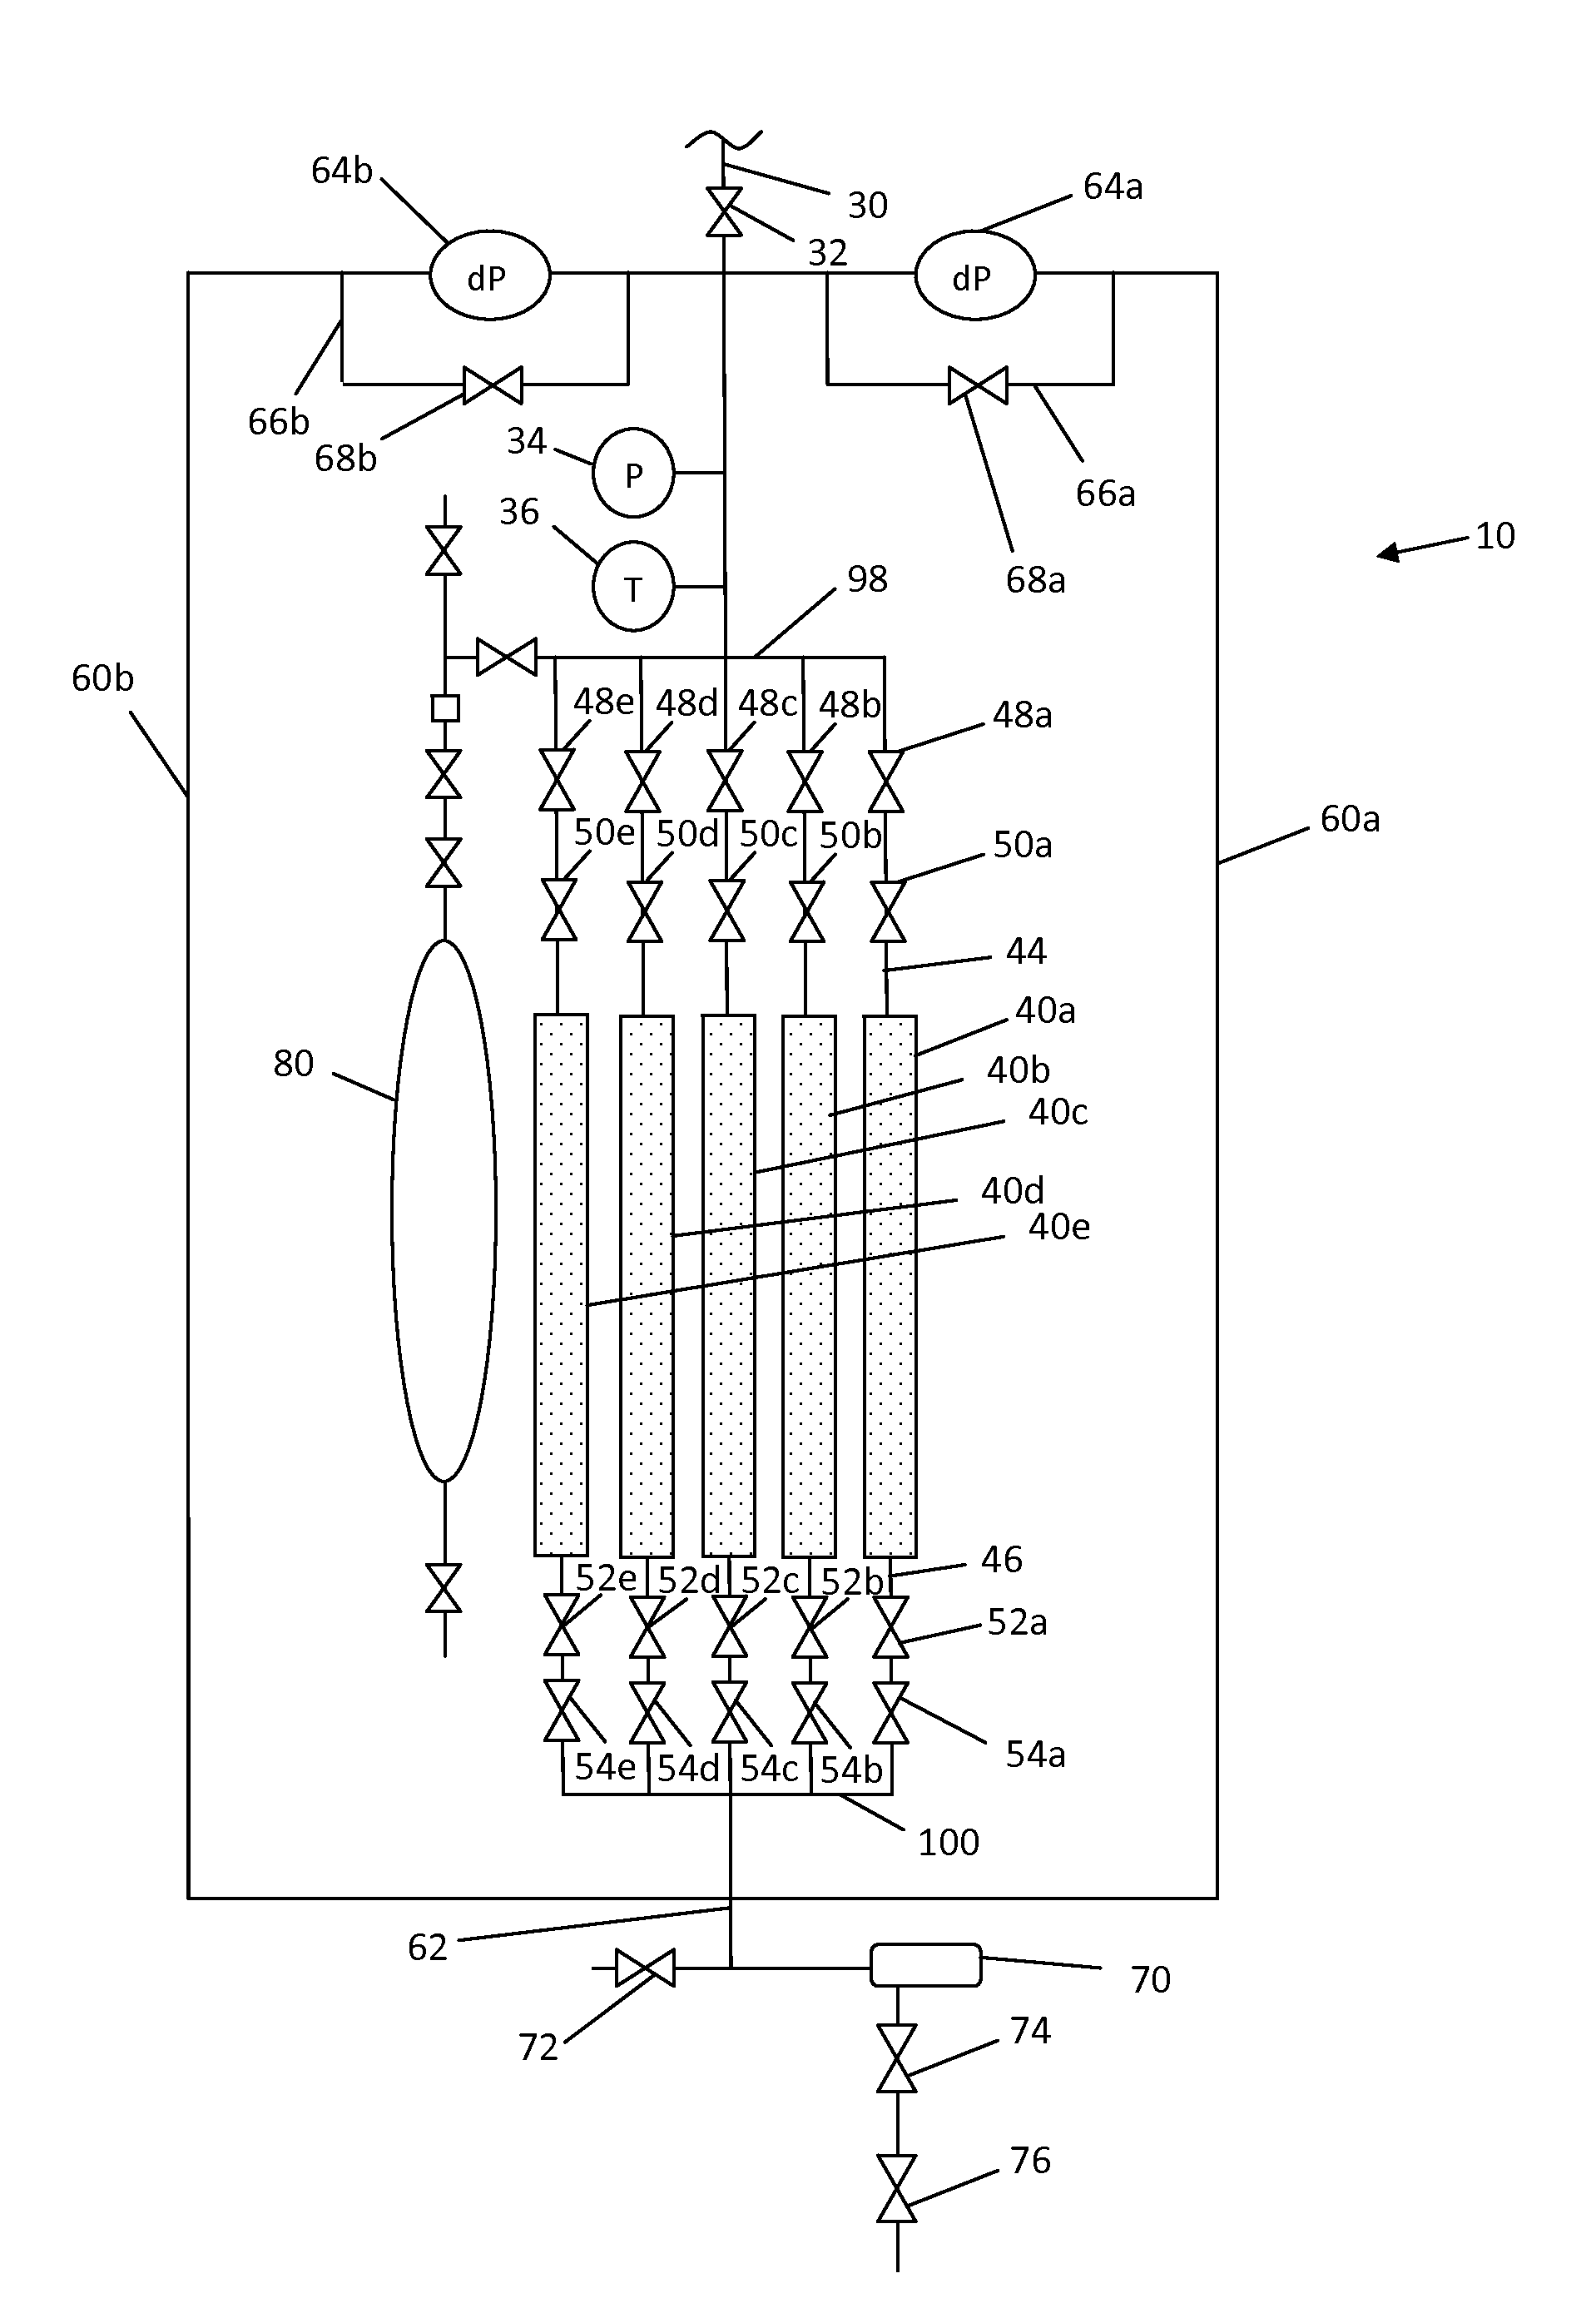 Apparatus and Method For Measuring Viscosity of a Fluid